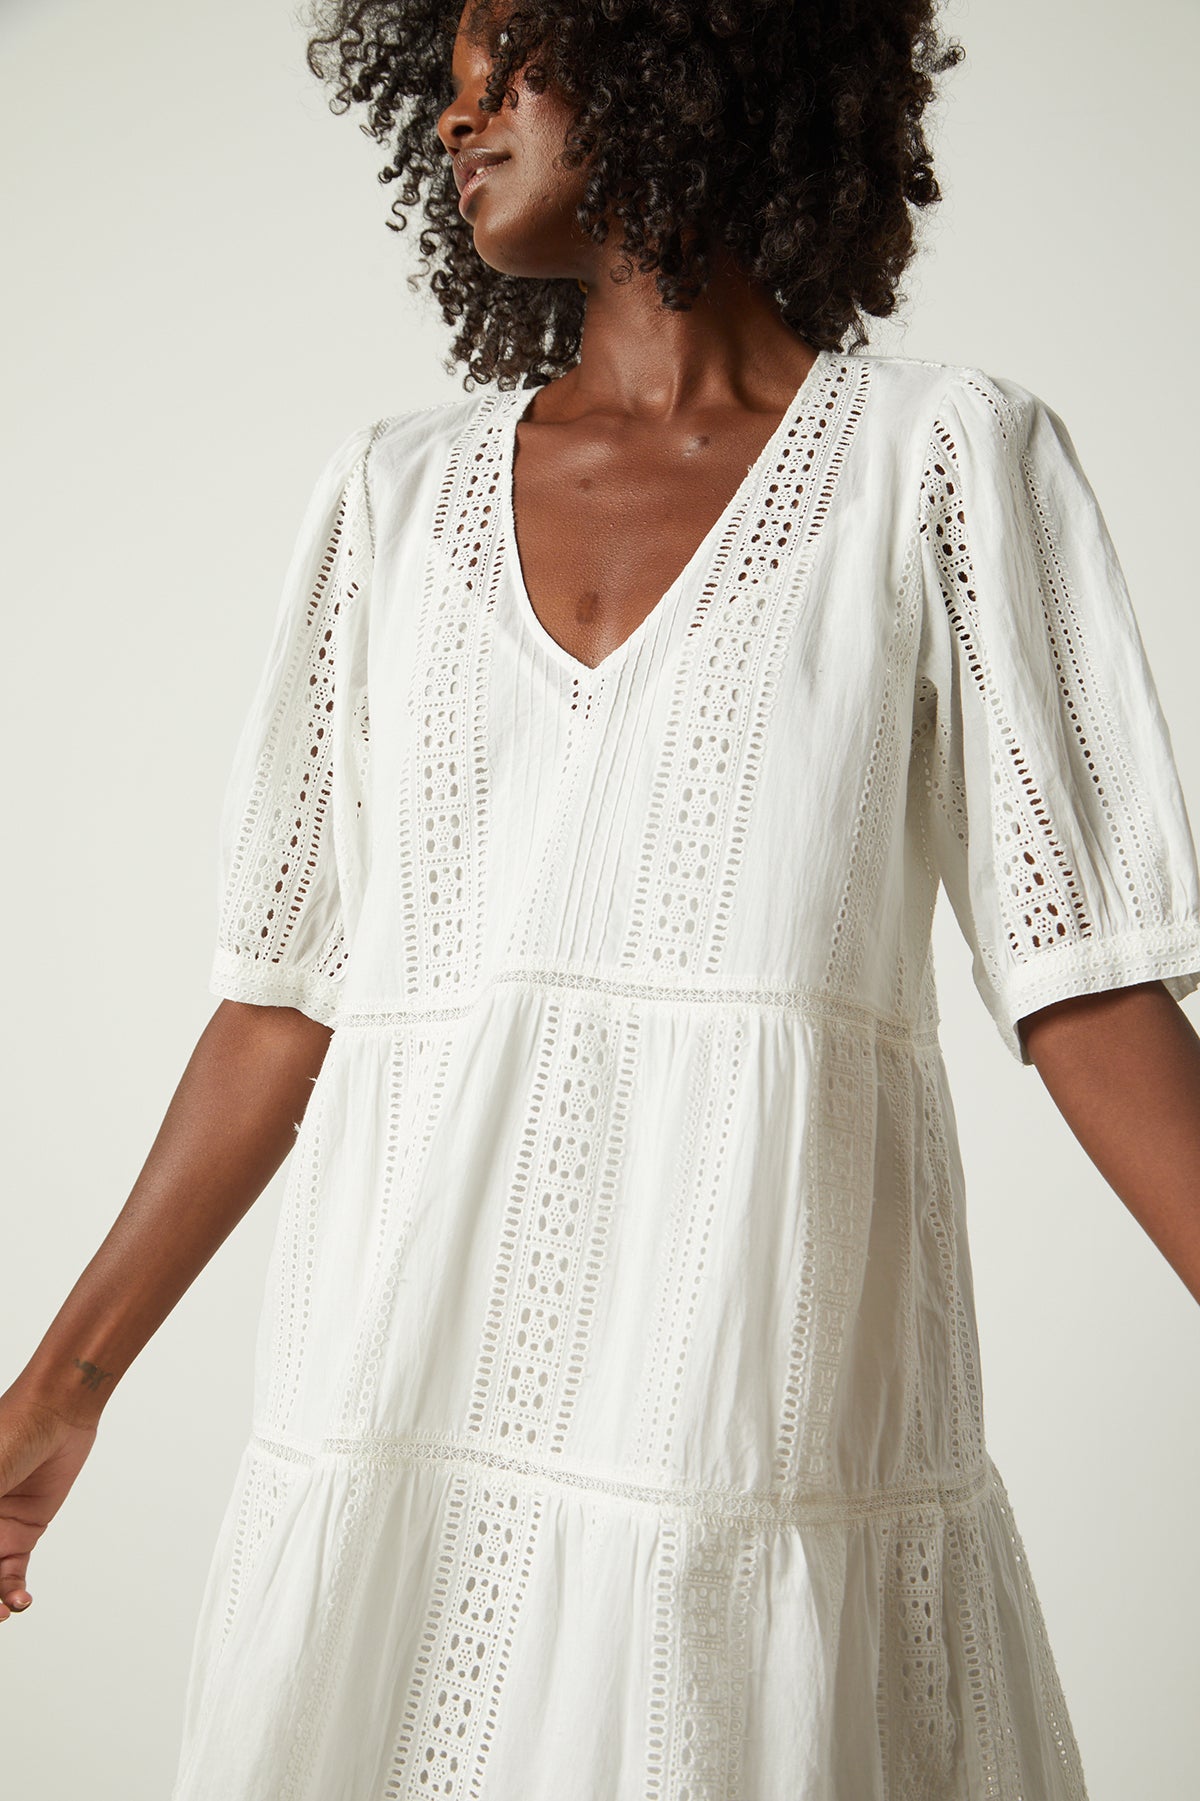   Margaret dress in embroidered cream close up front 